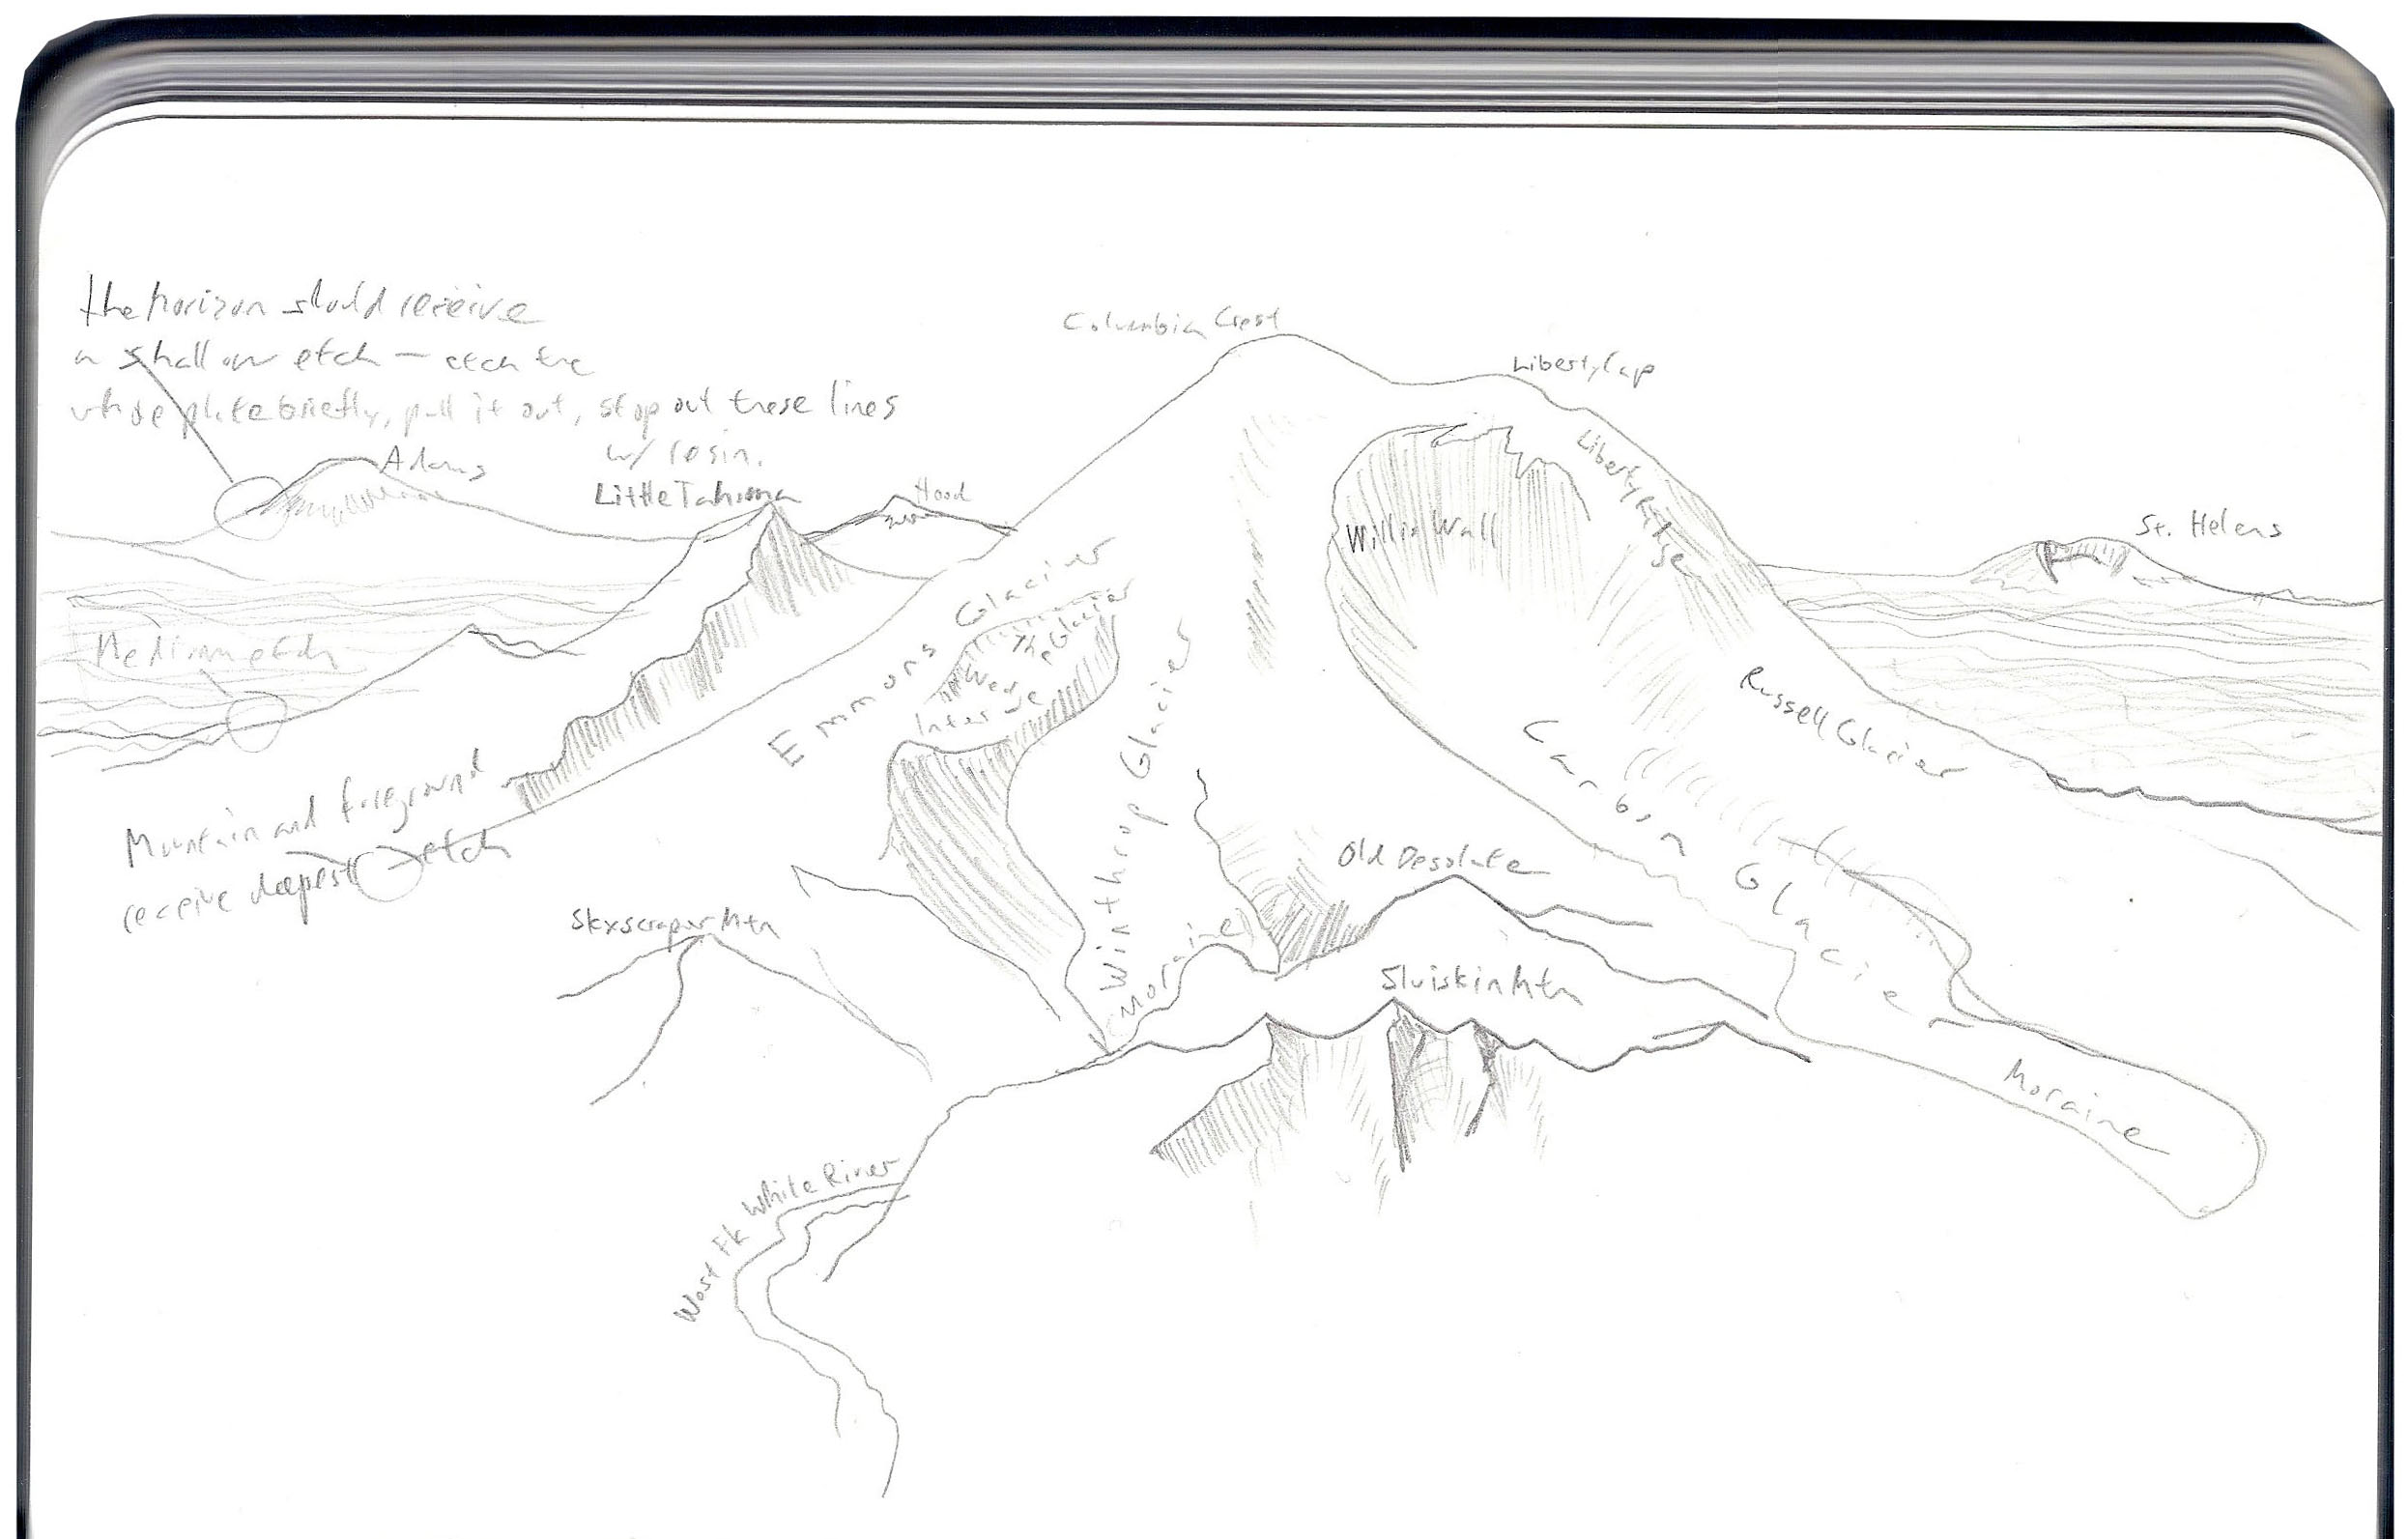 early concept sketch of Mt. Rainier map